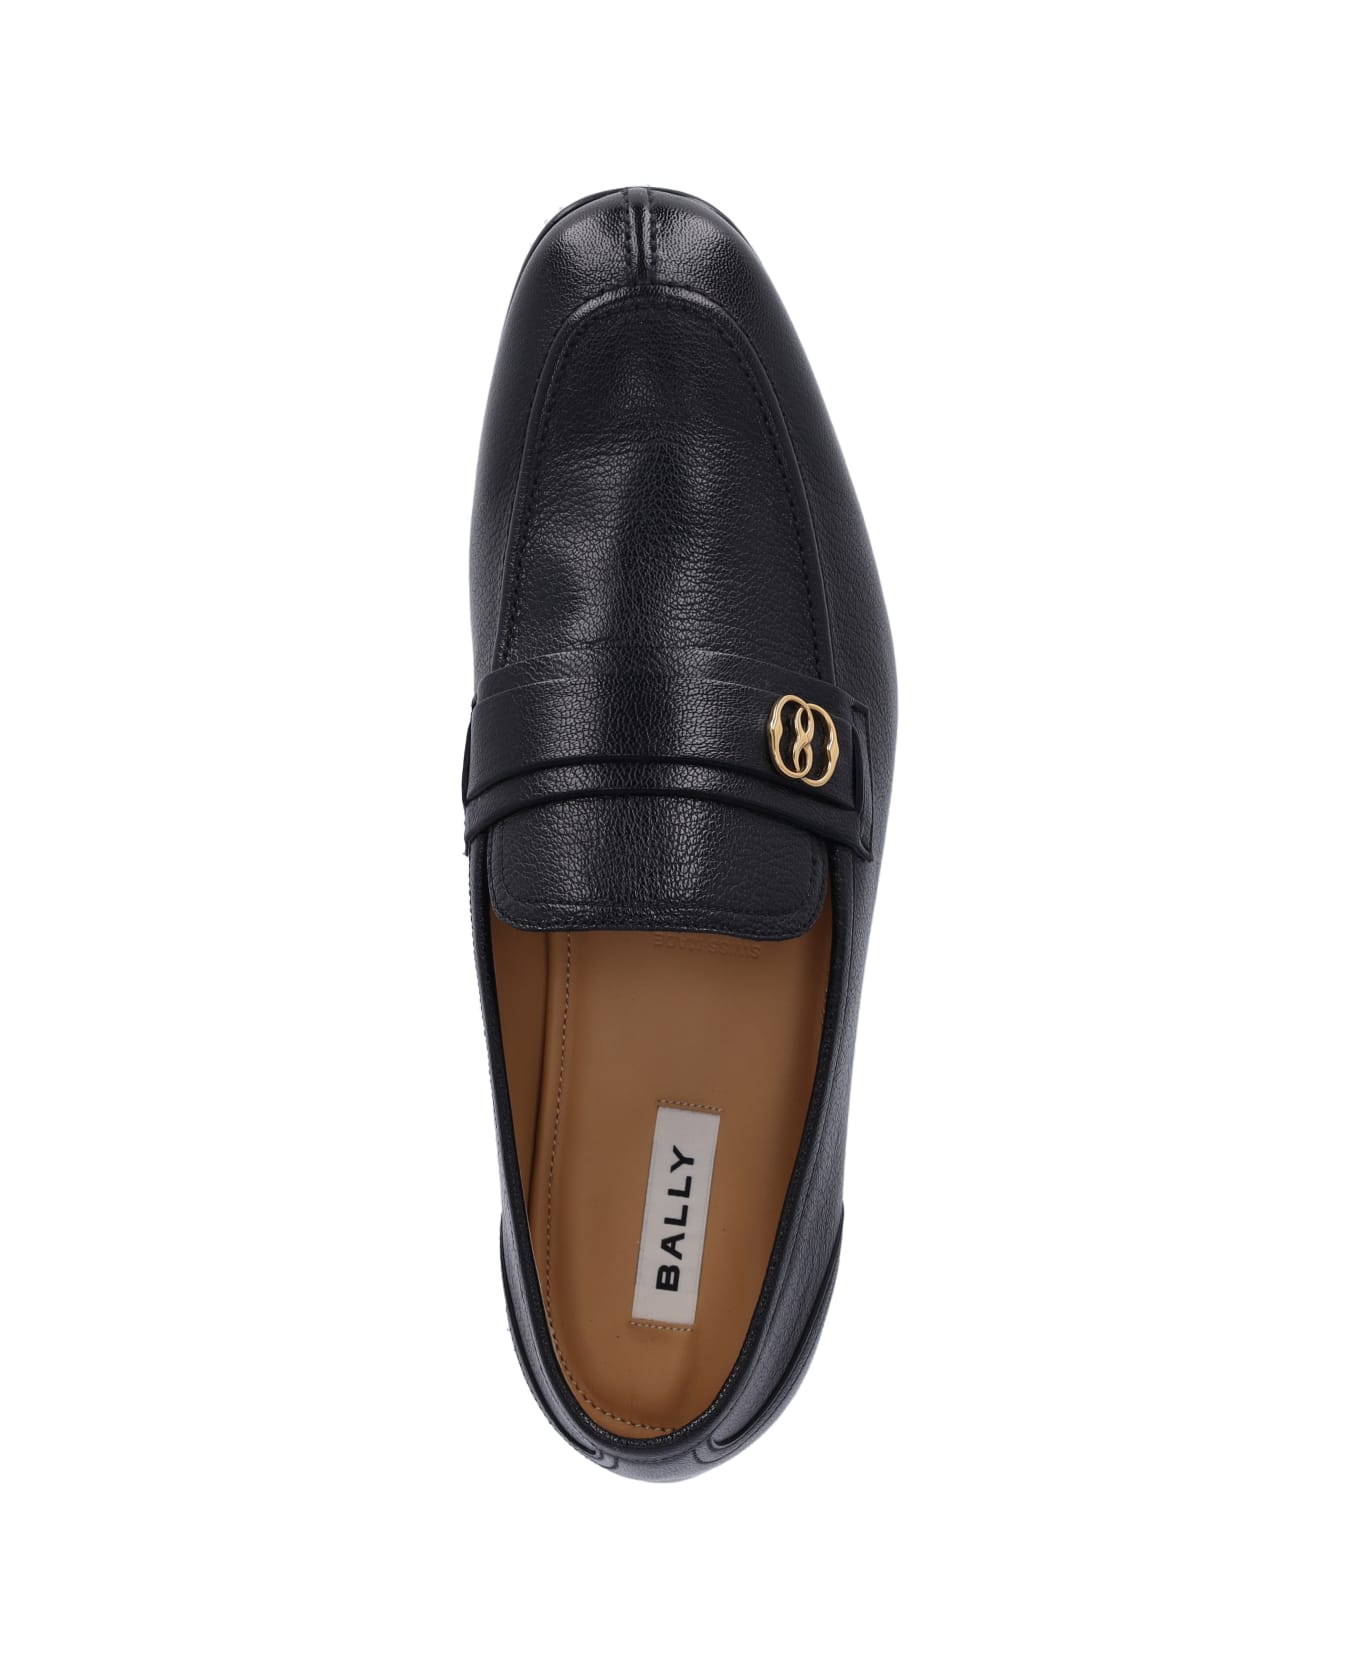 Bally 'suisse' Loafers - Black  